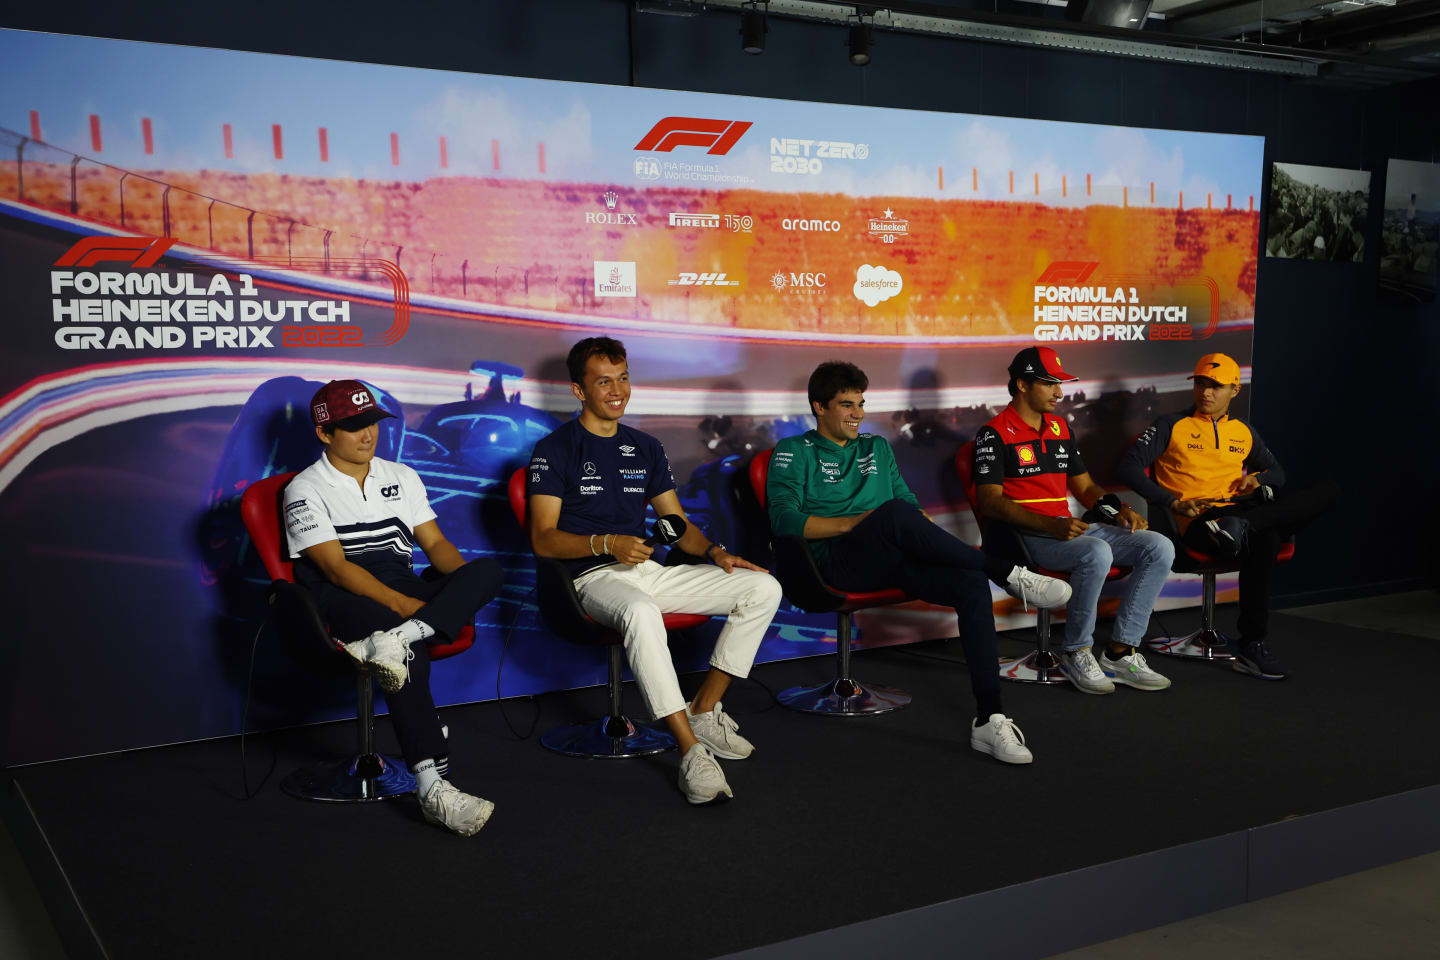 ZANDVOORT, NETHERLANDS - SEPTEMBER 01: (L-R) Yuki Tsunoda of Japan and Scuderia AlphaTauri, Alexander Albon of Thailand and Williams, Lance Stroll of Canada and Aston Martin F1 Team, Carlos Sainz of Spain and Ferrari and Lando Norris of Great Britain and McLaren attend the Drivers Press Conference during previews ahead of the F1 Grand Prix of The Netherlands at Circuit Zandvoort on September 01, 2022 in Zandvoort, Netherlands. (Photo by Lars Baron/Getty Images)